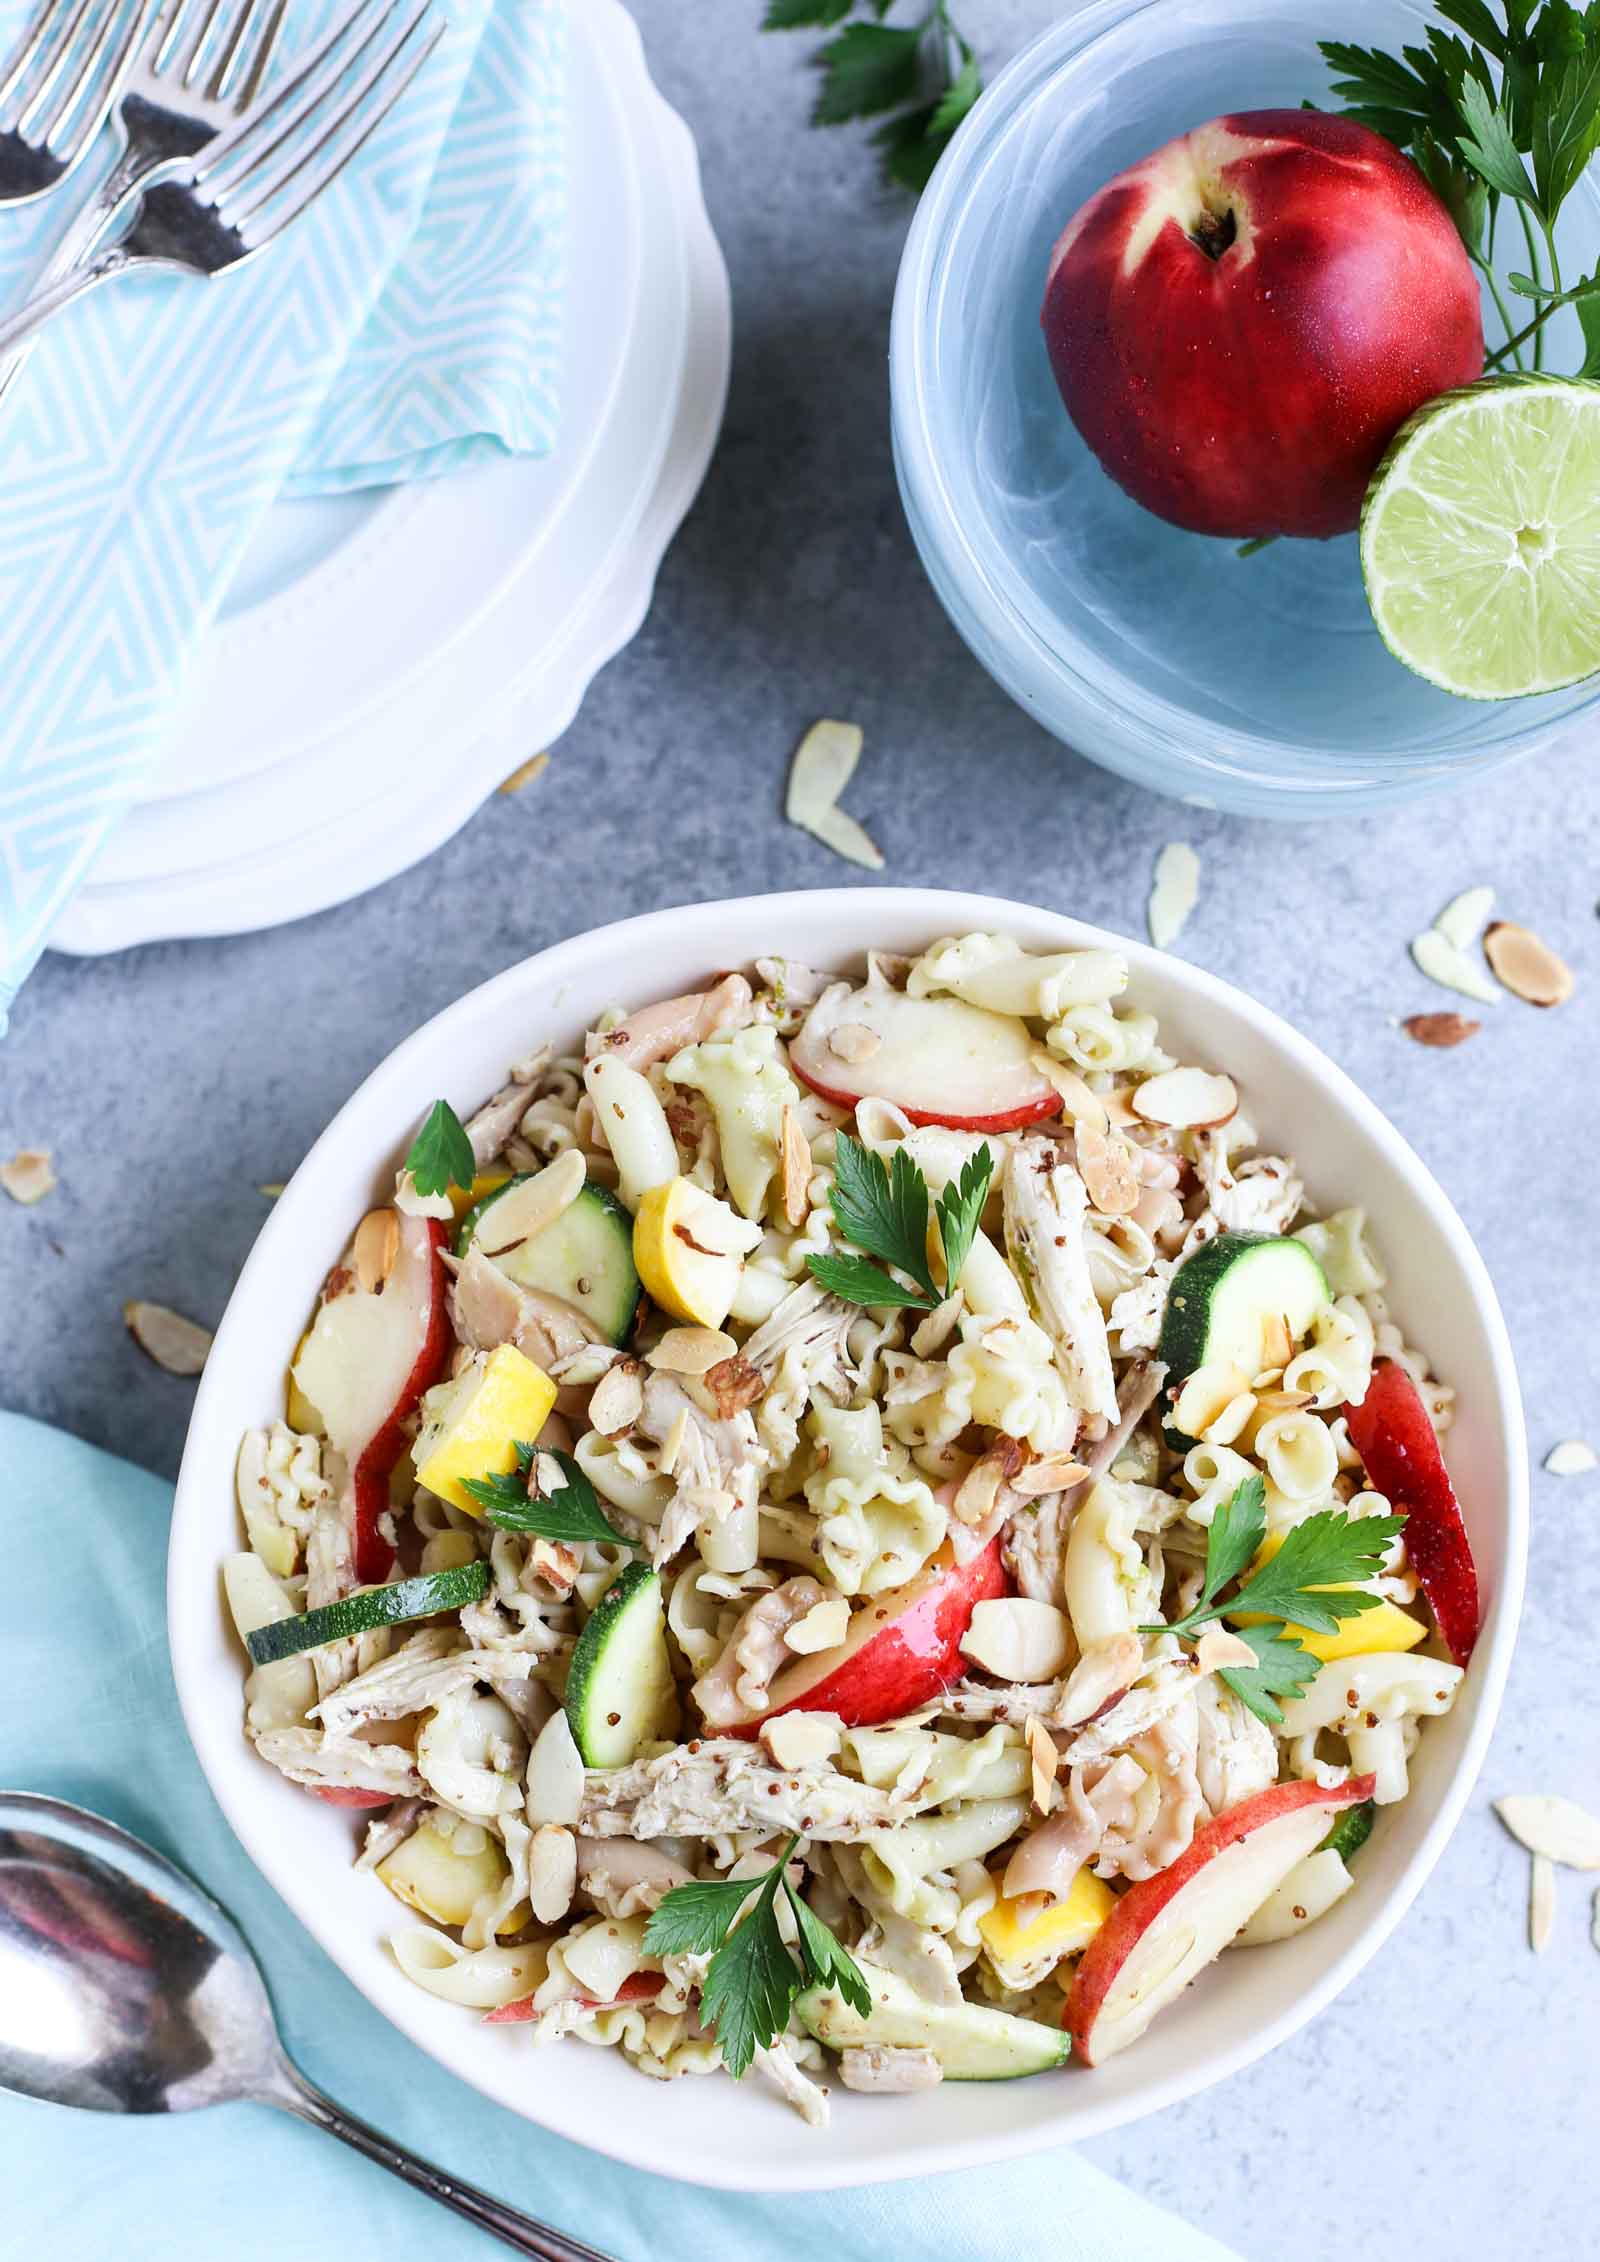 Summertime Chicken Pasta Salad with Nectarines & Squash | Tangy Lime Vinaigrette ties together a delicious unexpected surprise! Perfect as a main course and perfect for summer! Simple and delish! | WorldofPastabilities.com